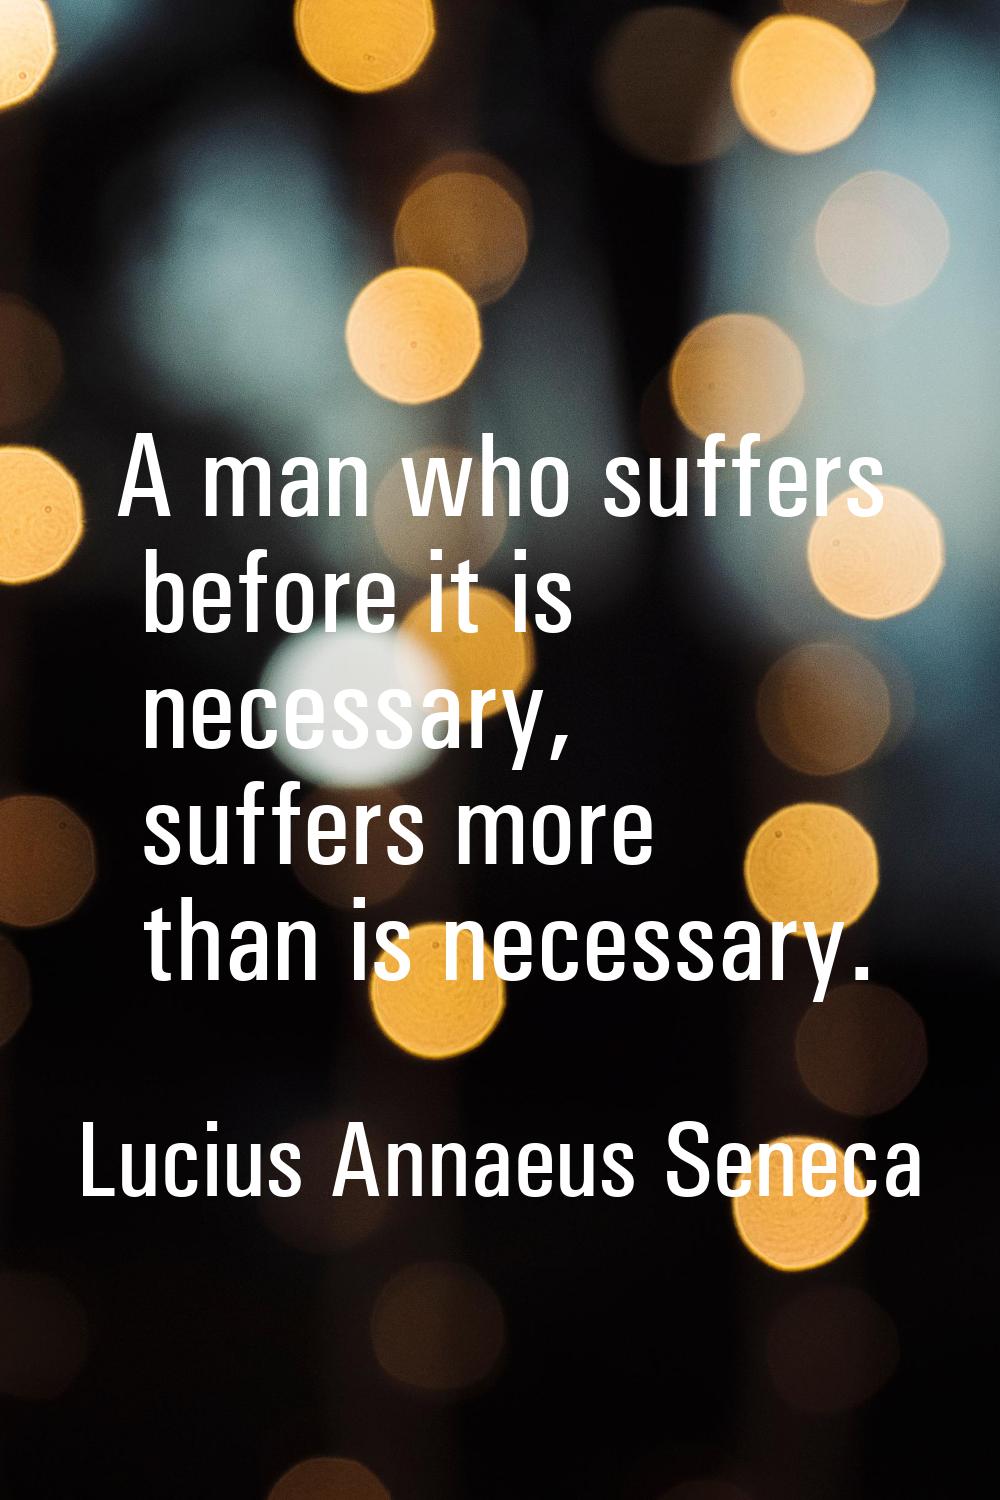 A man who suffers before it is necessary, suffers more than is necessary.